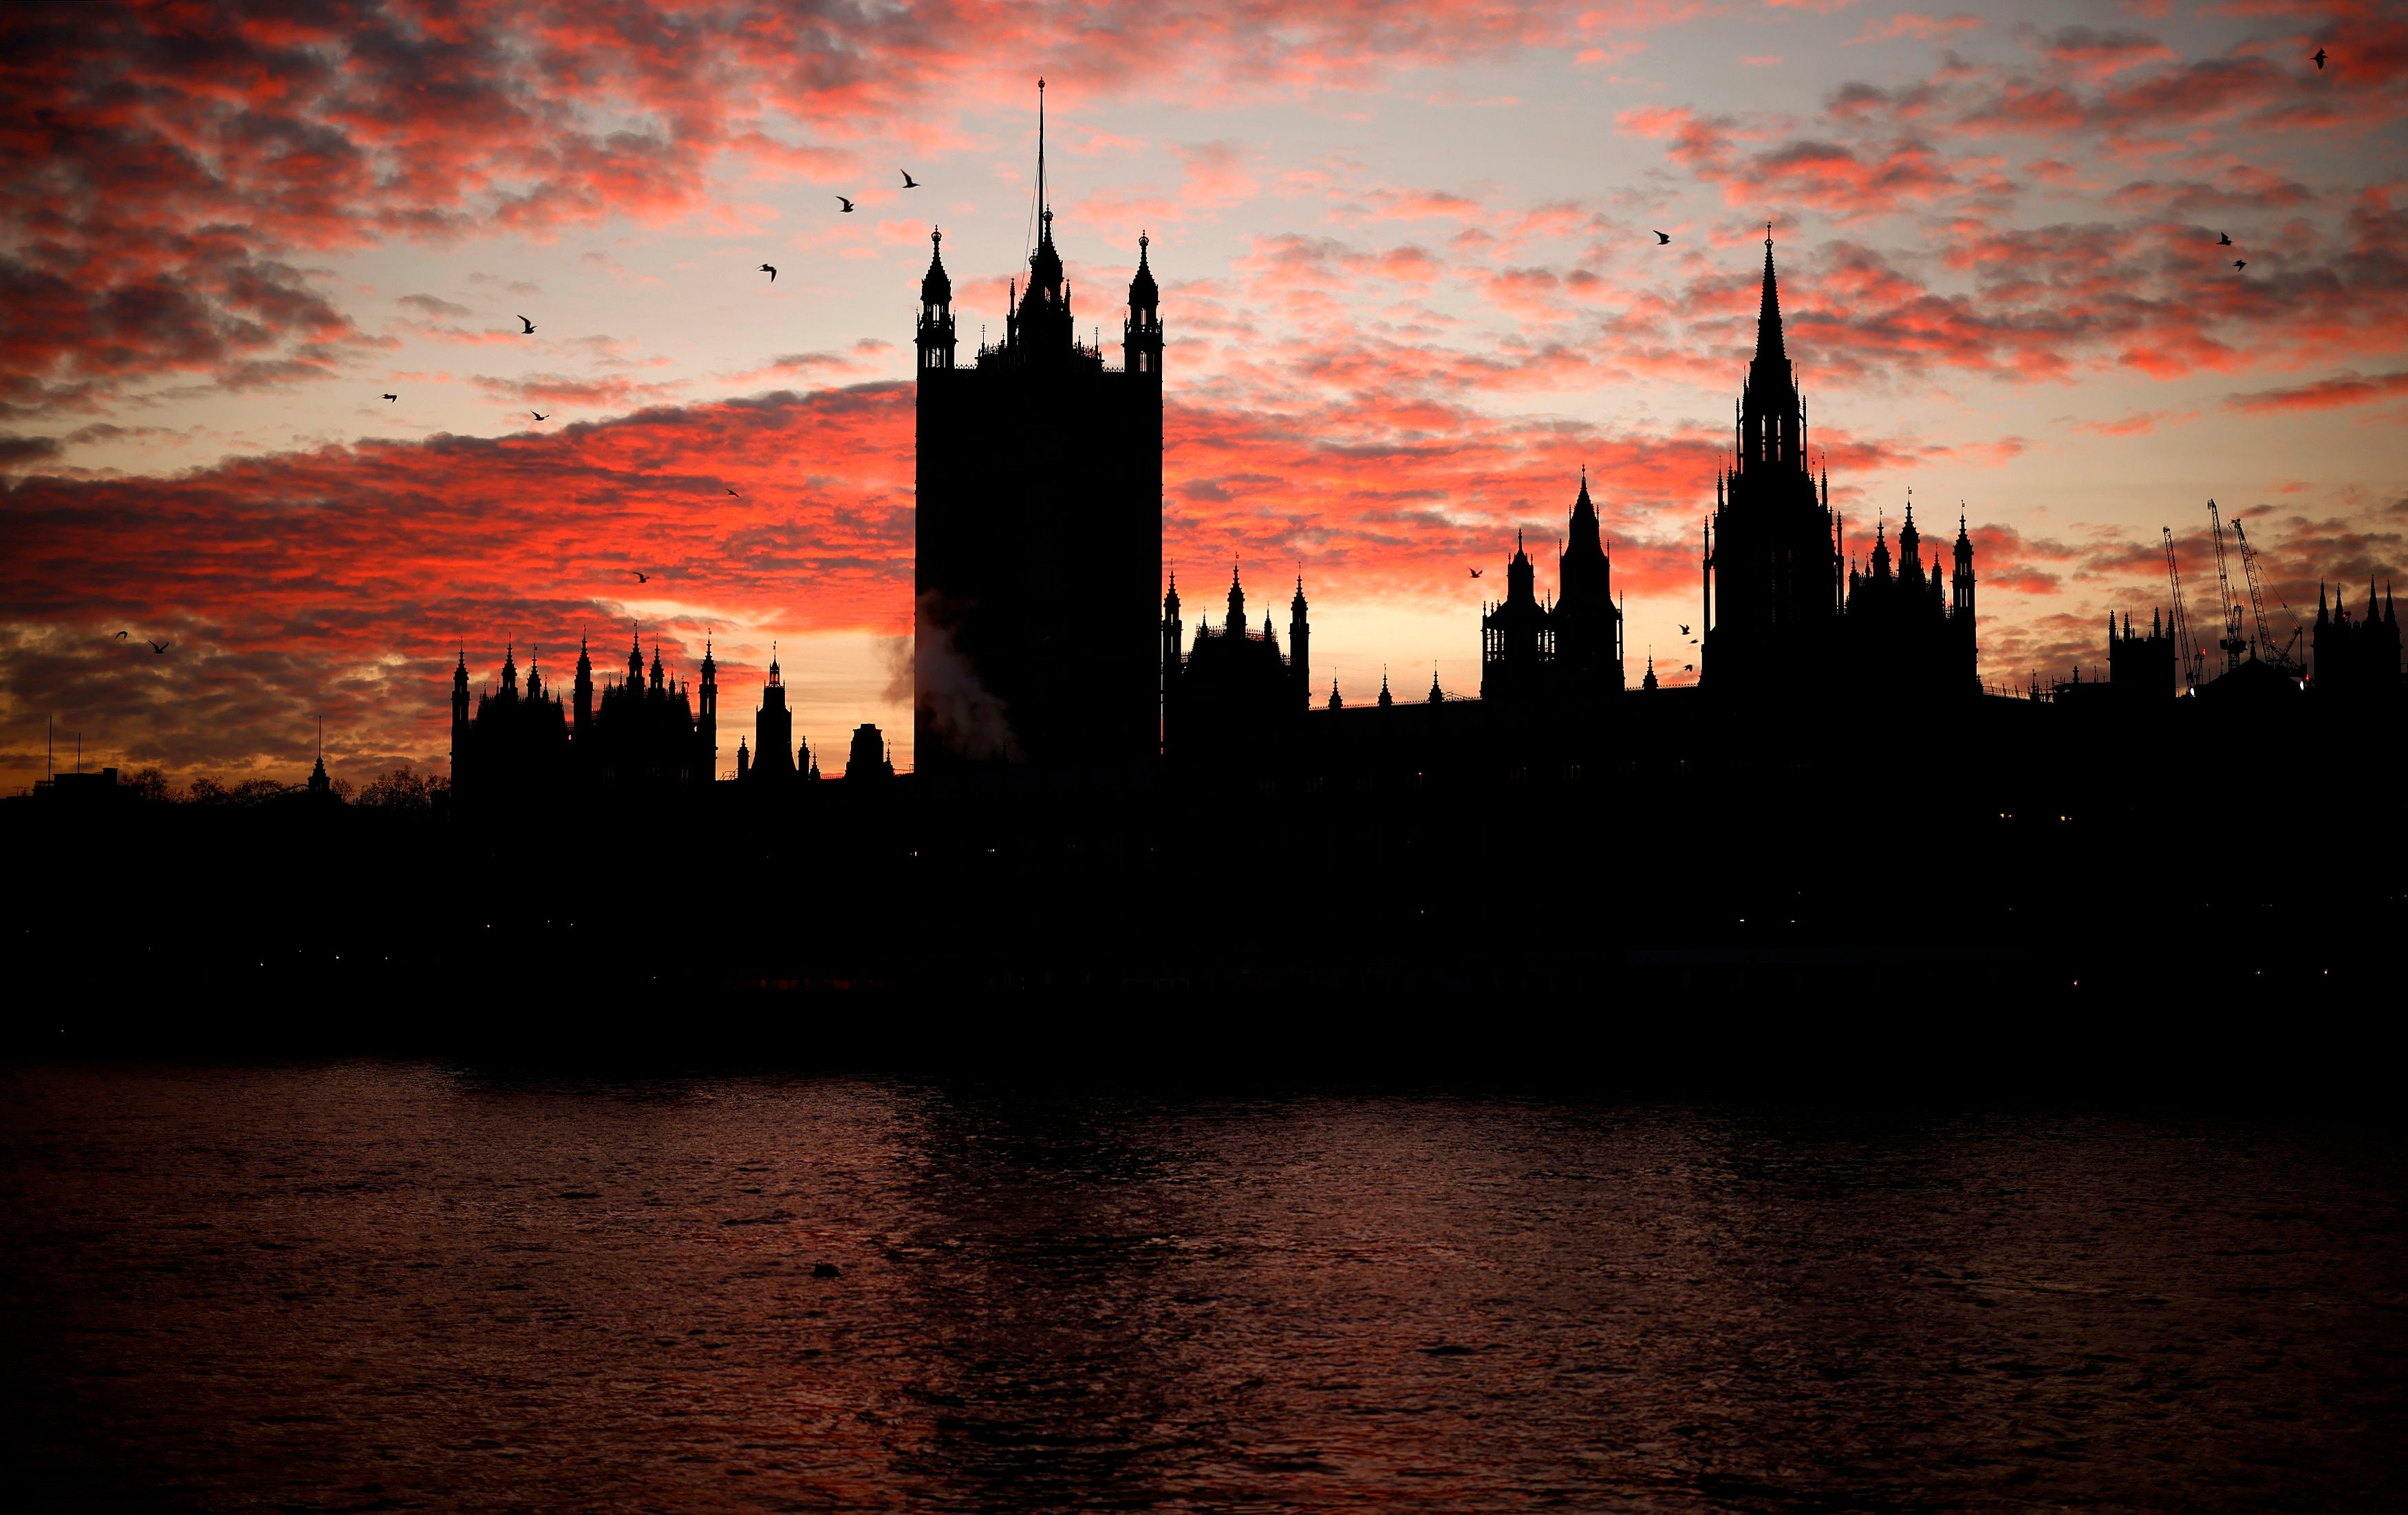 The sun sets behind the Victoria Tower at the Palace of Westminster, home to the Houses of Parliament